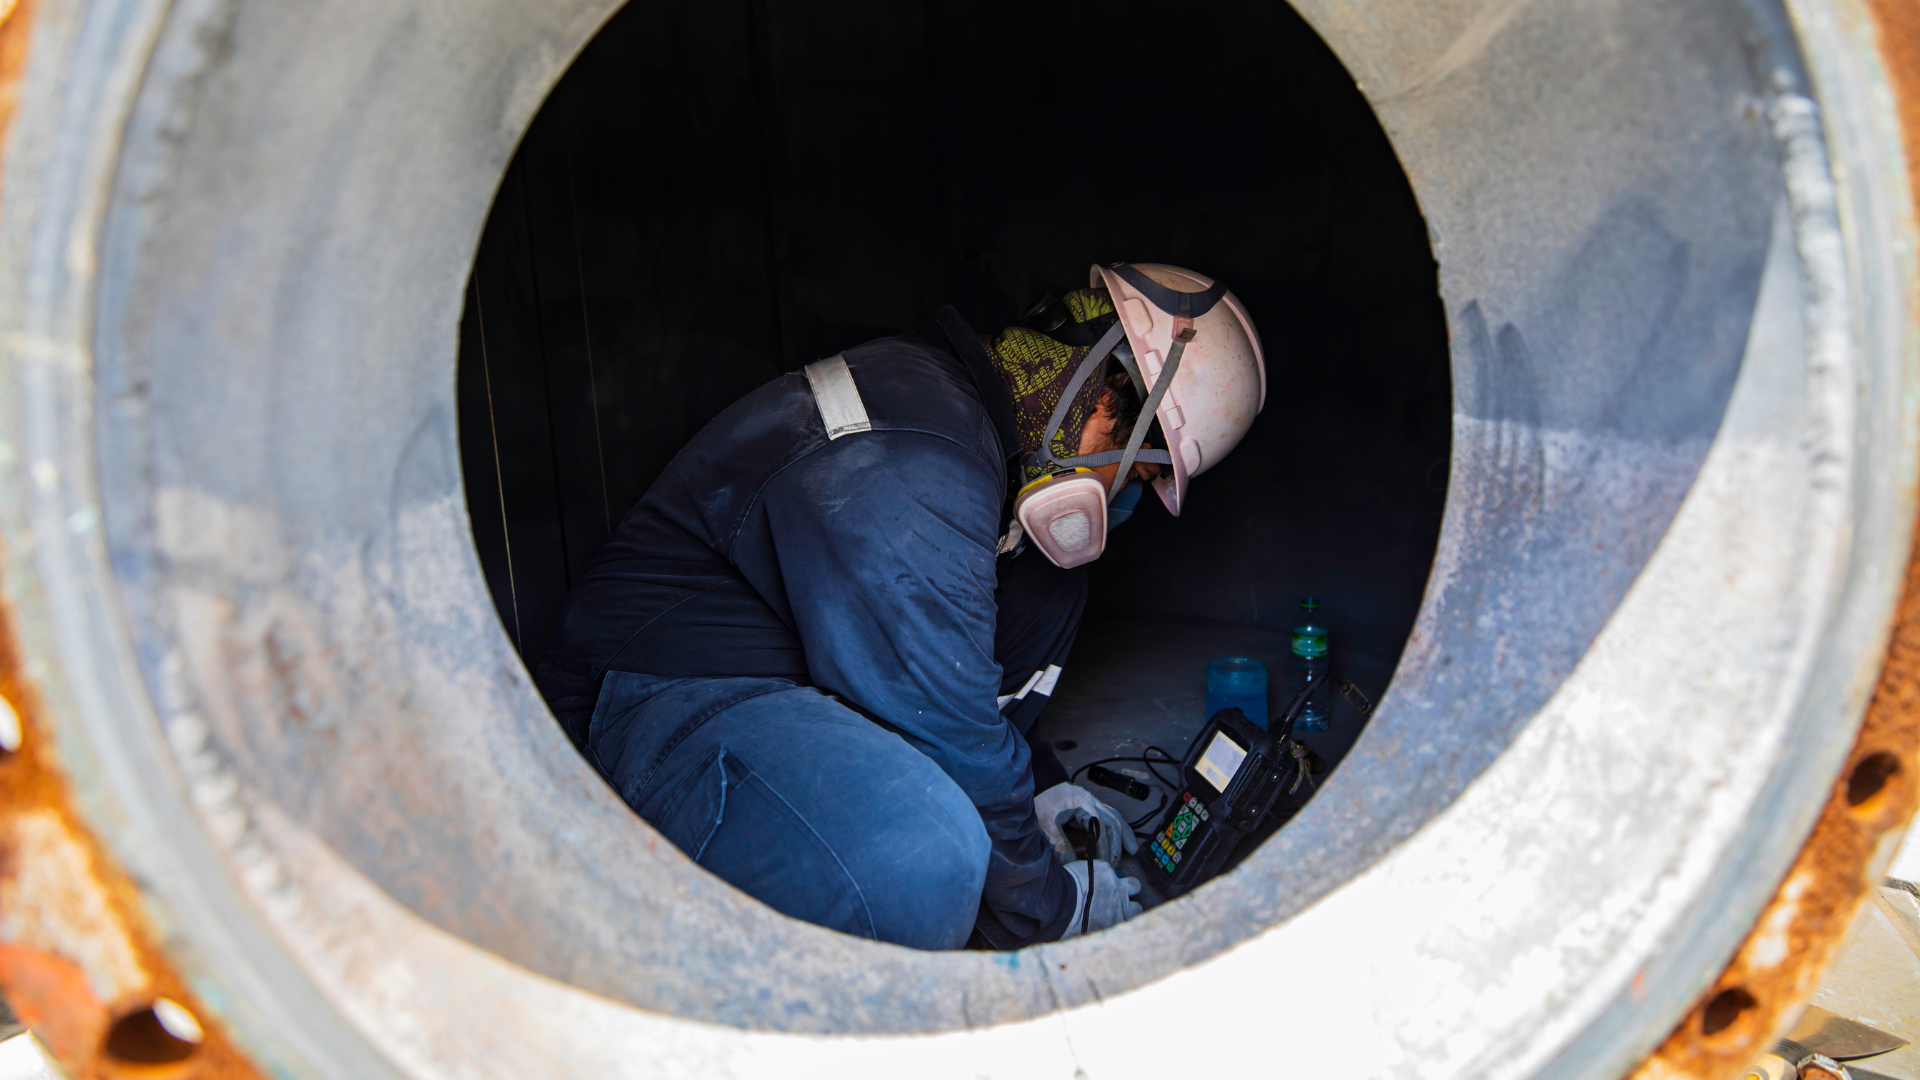 Down Under Training - Enter and work in confined spaces & Gas test atmospheres combined Full course